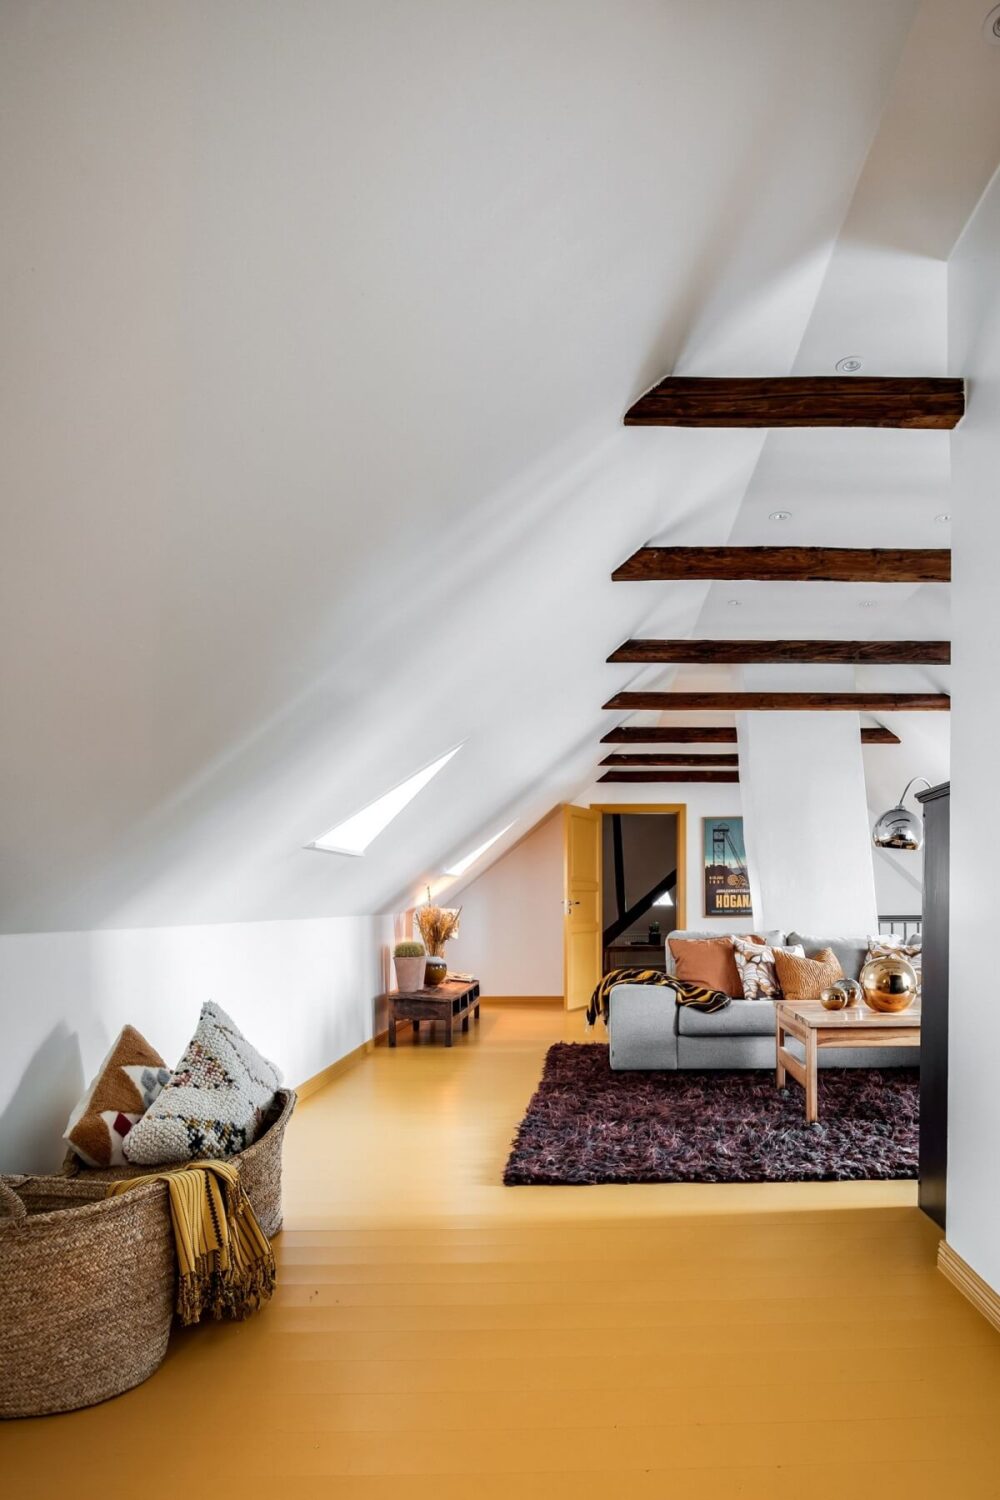 living-room-pitched-ceiling-wooden-beams-yellow-floorboards-nordroom